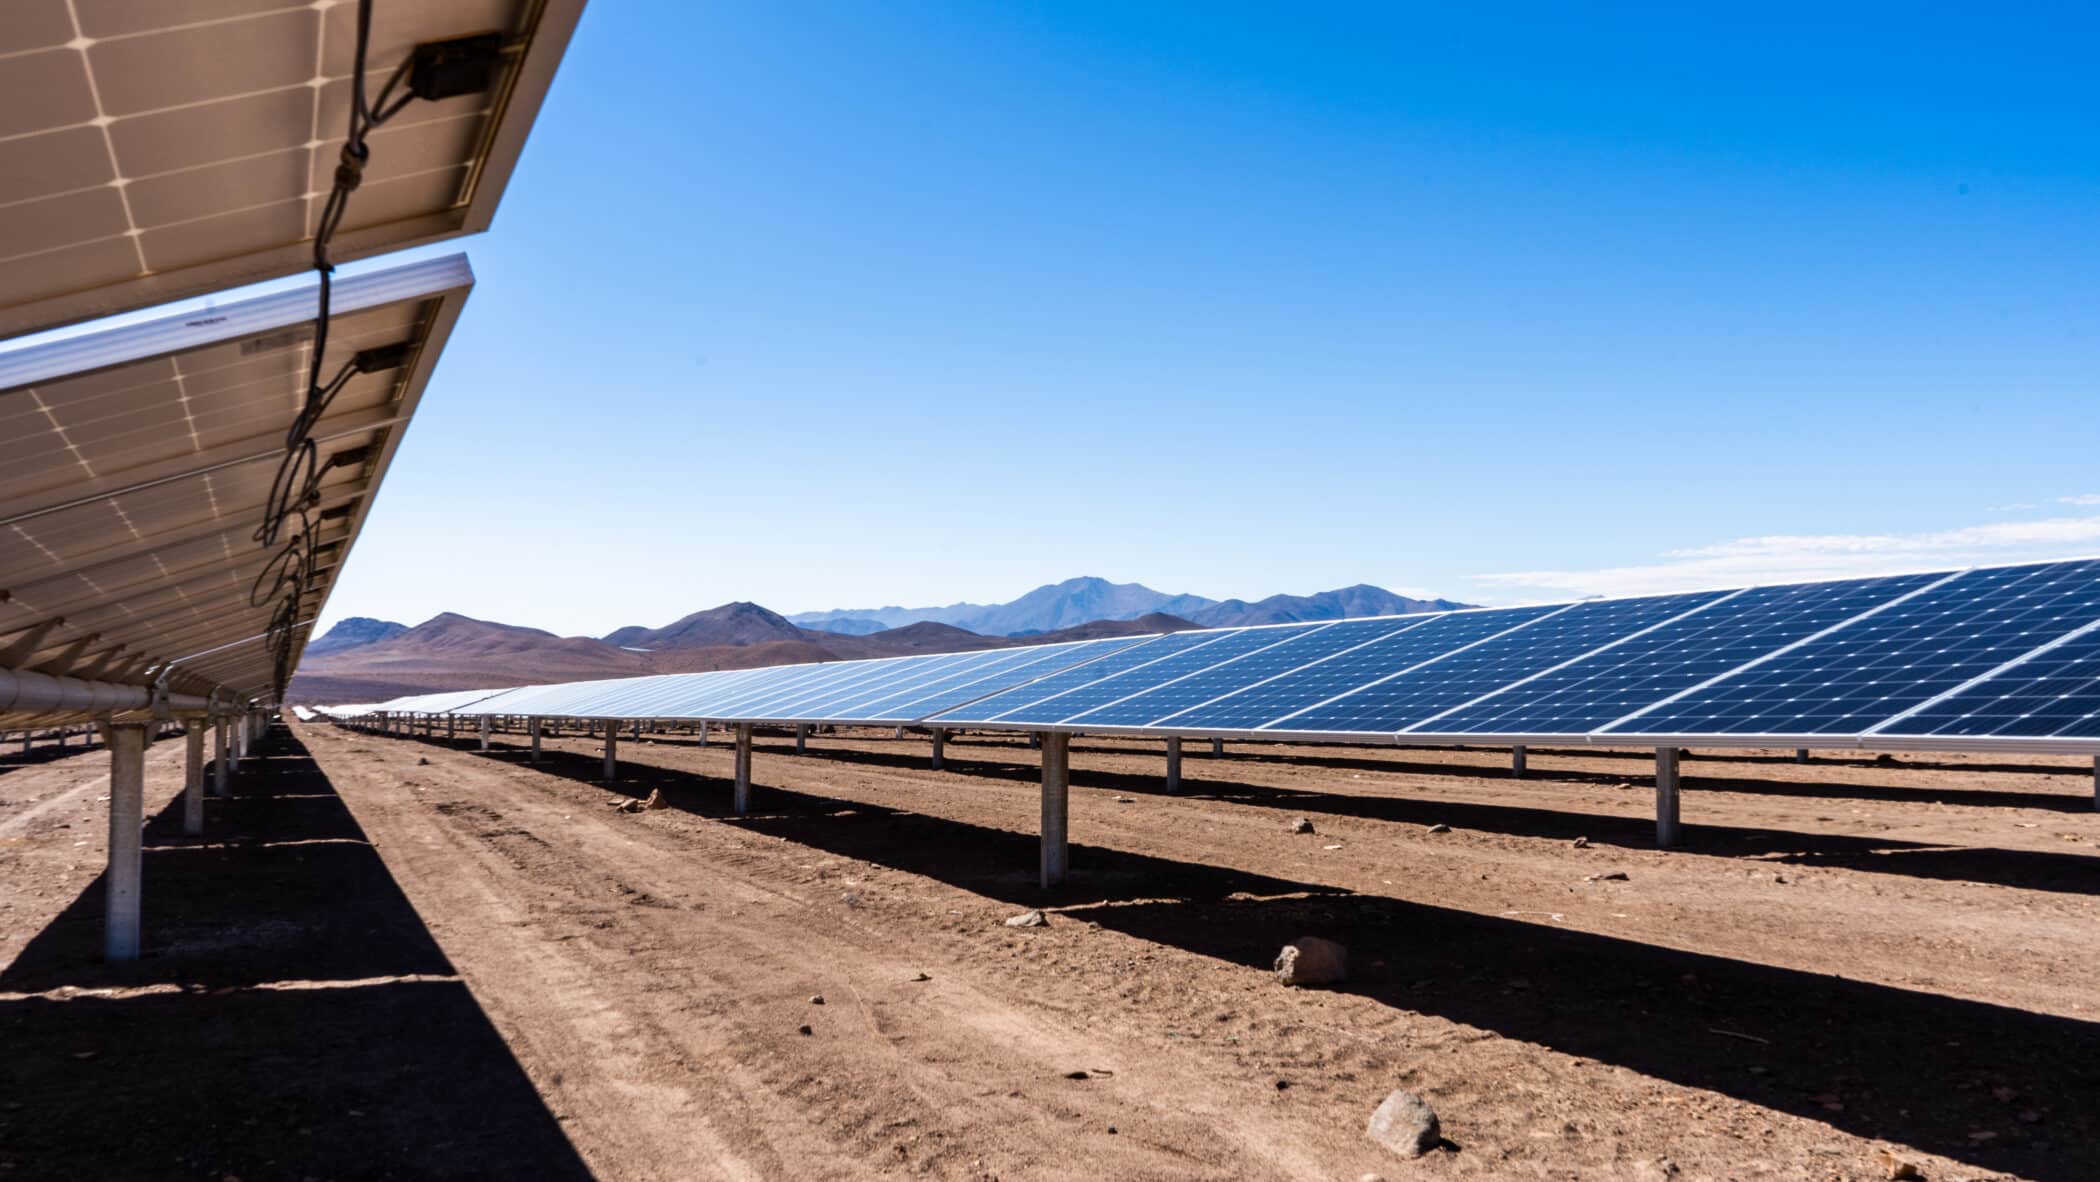 Low down shot beneath a row of solar pv panels in a solar farm with mountains in the distance